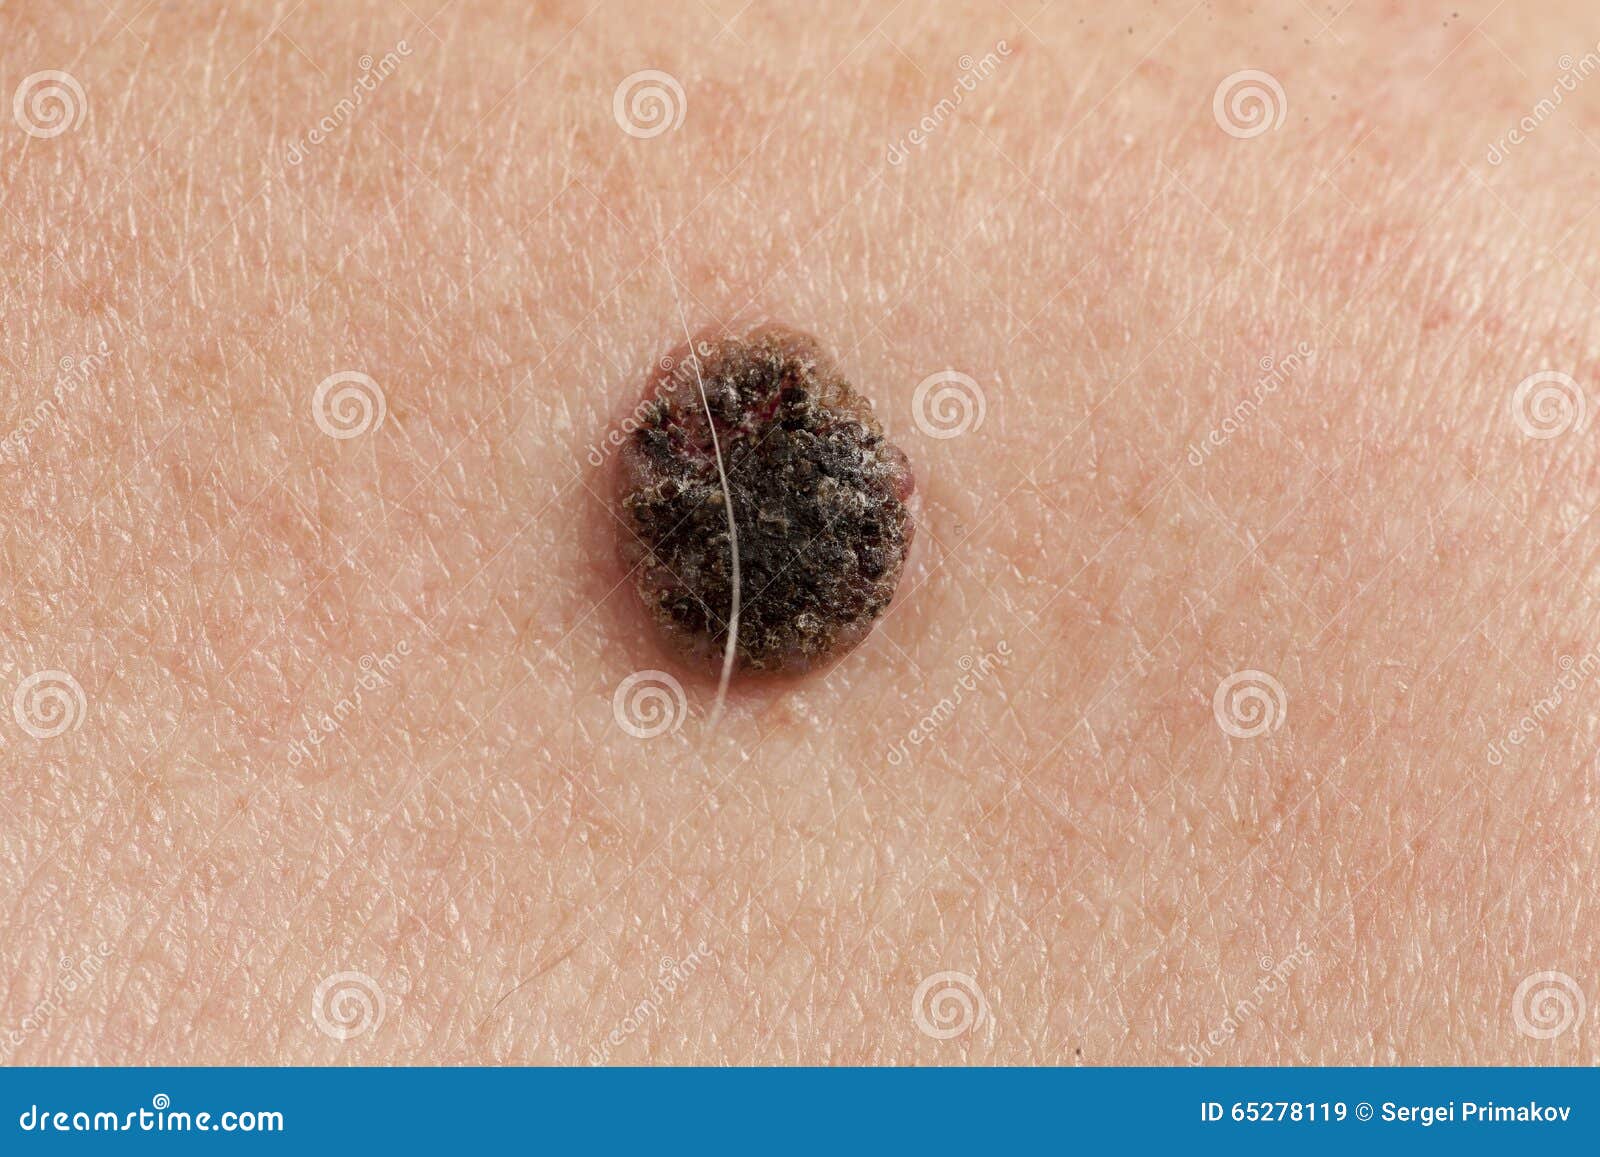 Treating Squamous Cell Carcinoma of the Skin - cancer.org